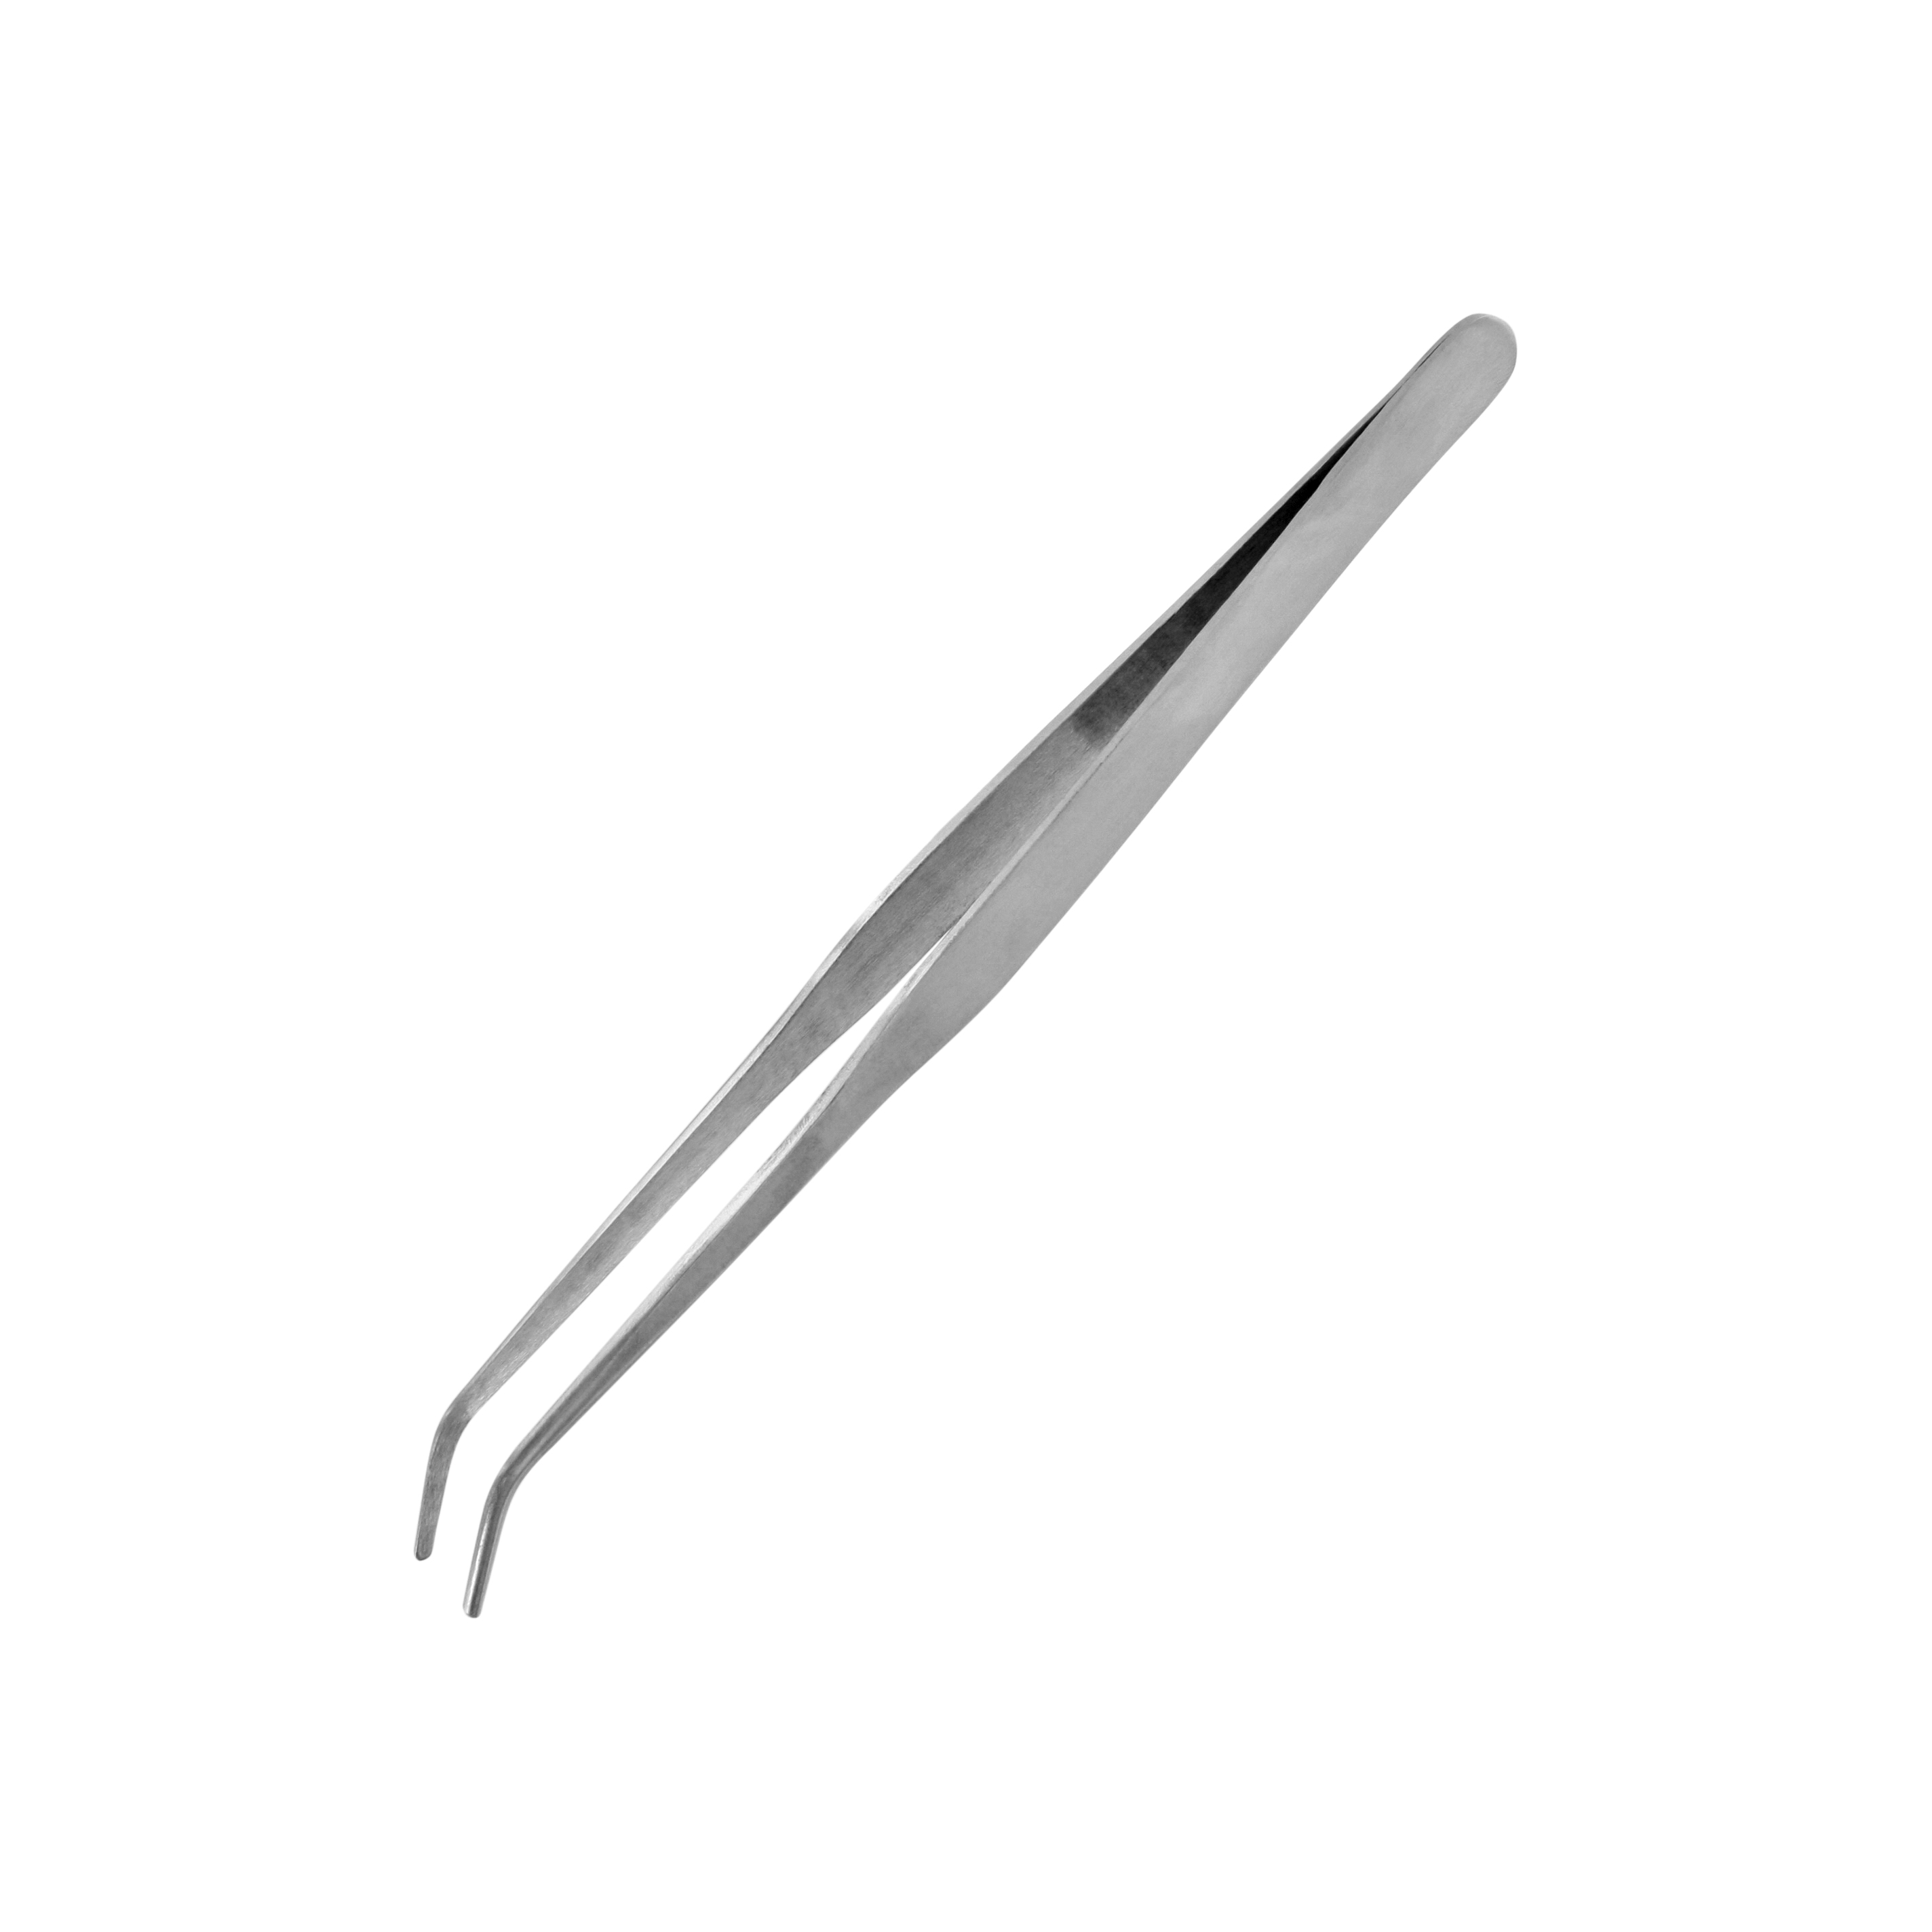 Vallejo Hobby Tools: Strong Curved Stainless Steel Tweezers (175mm)  